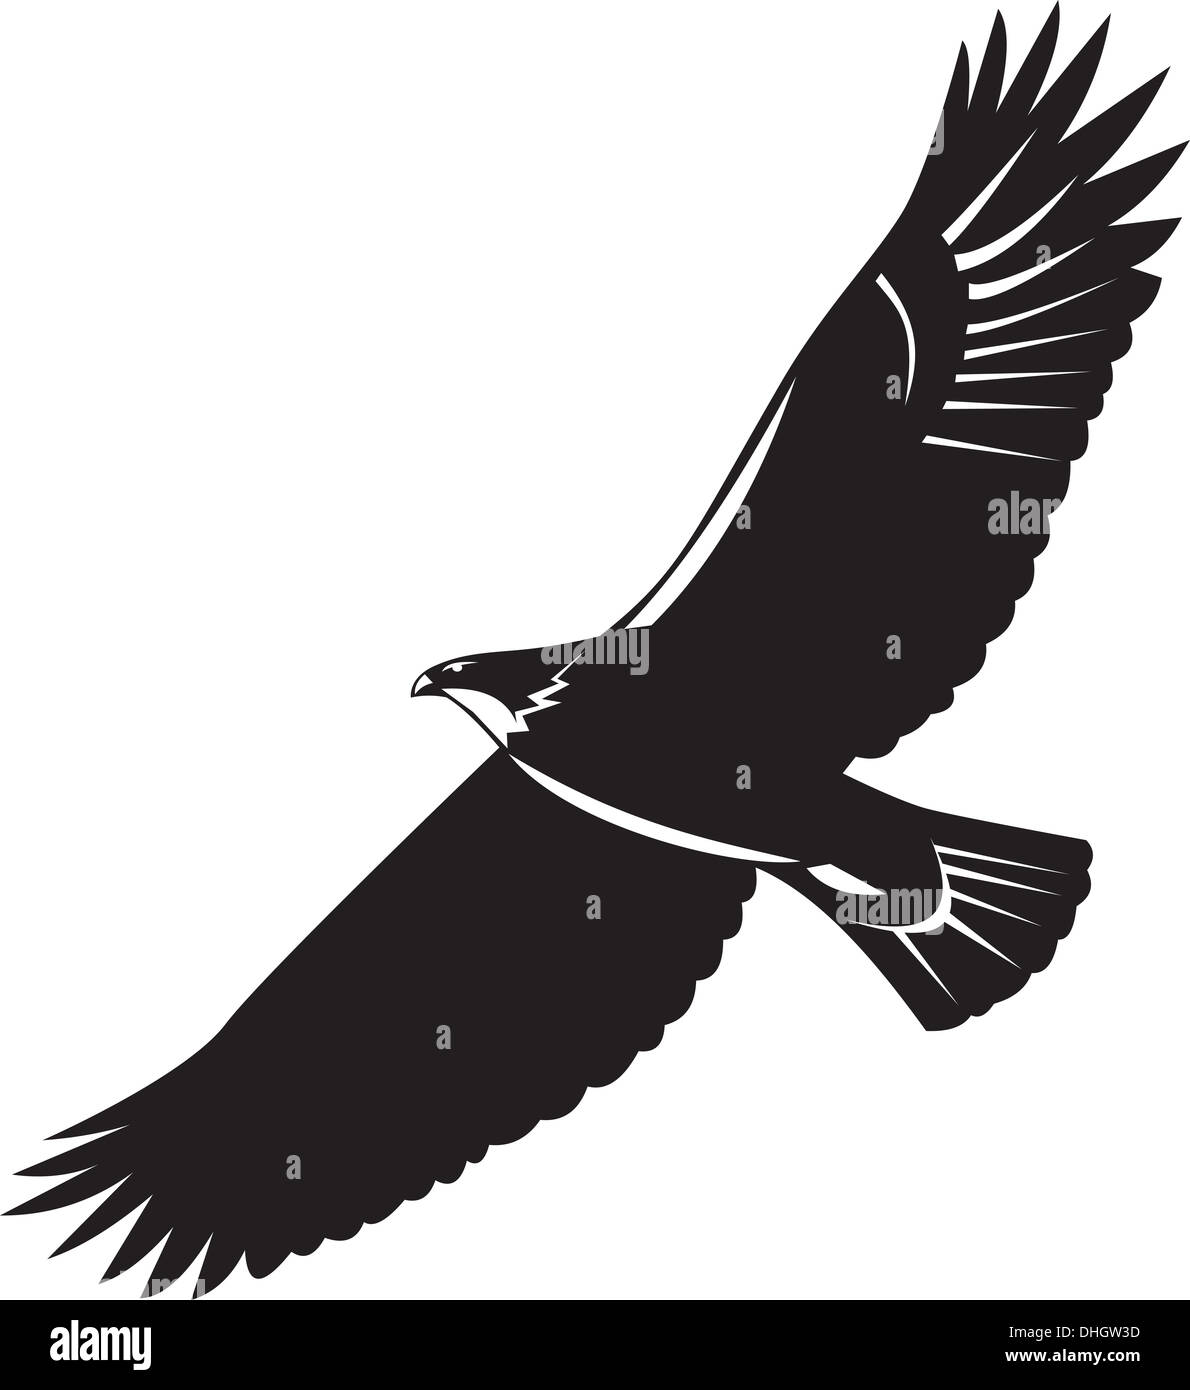 Illustration of a bald eagle flying soaring on isolated background done ...